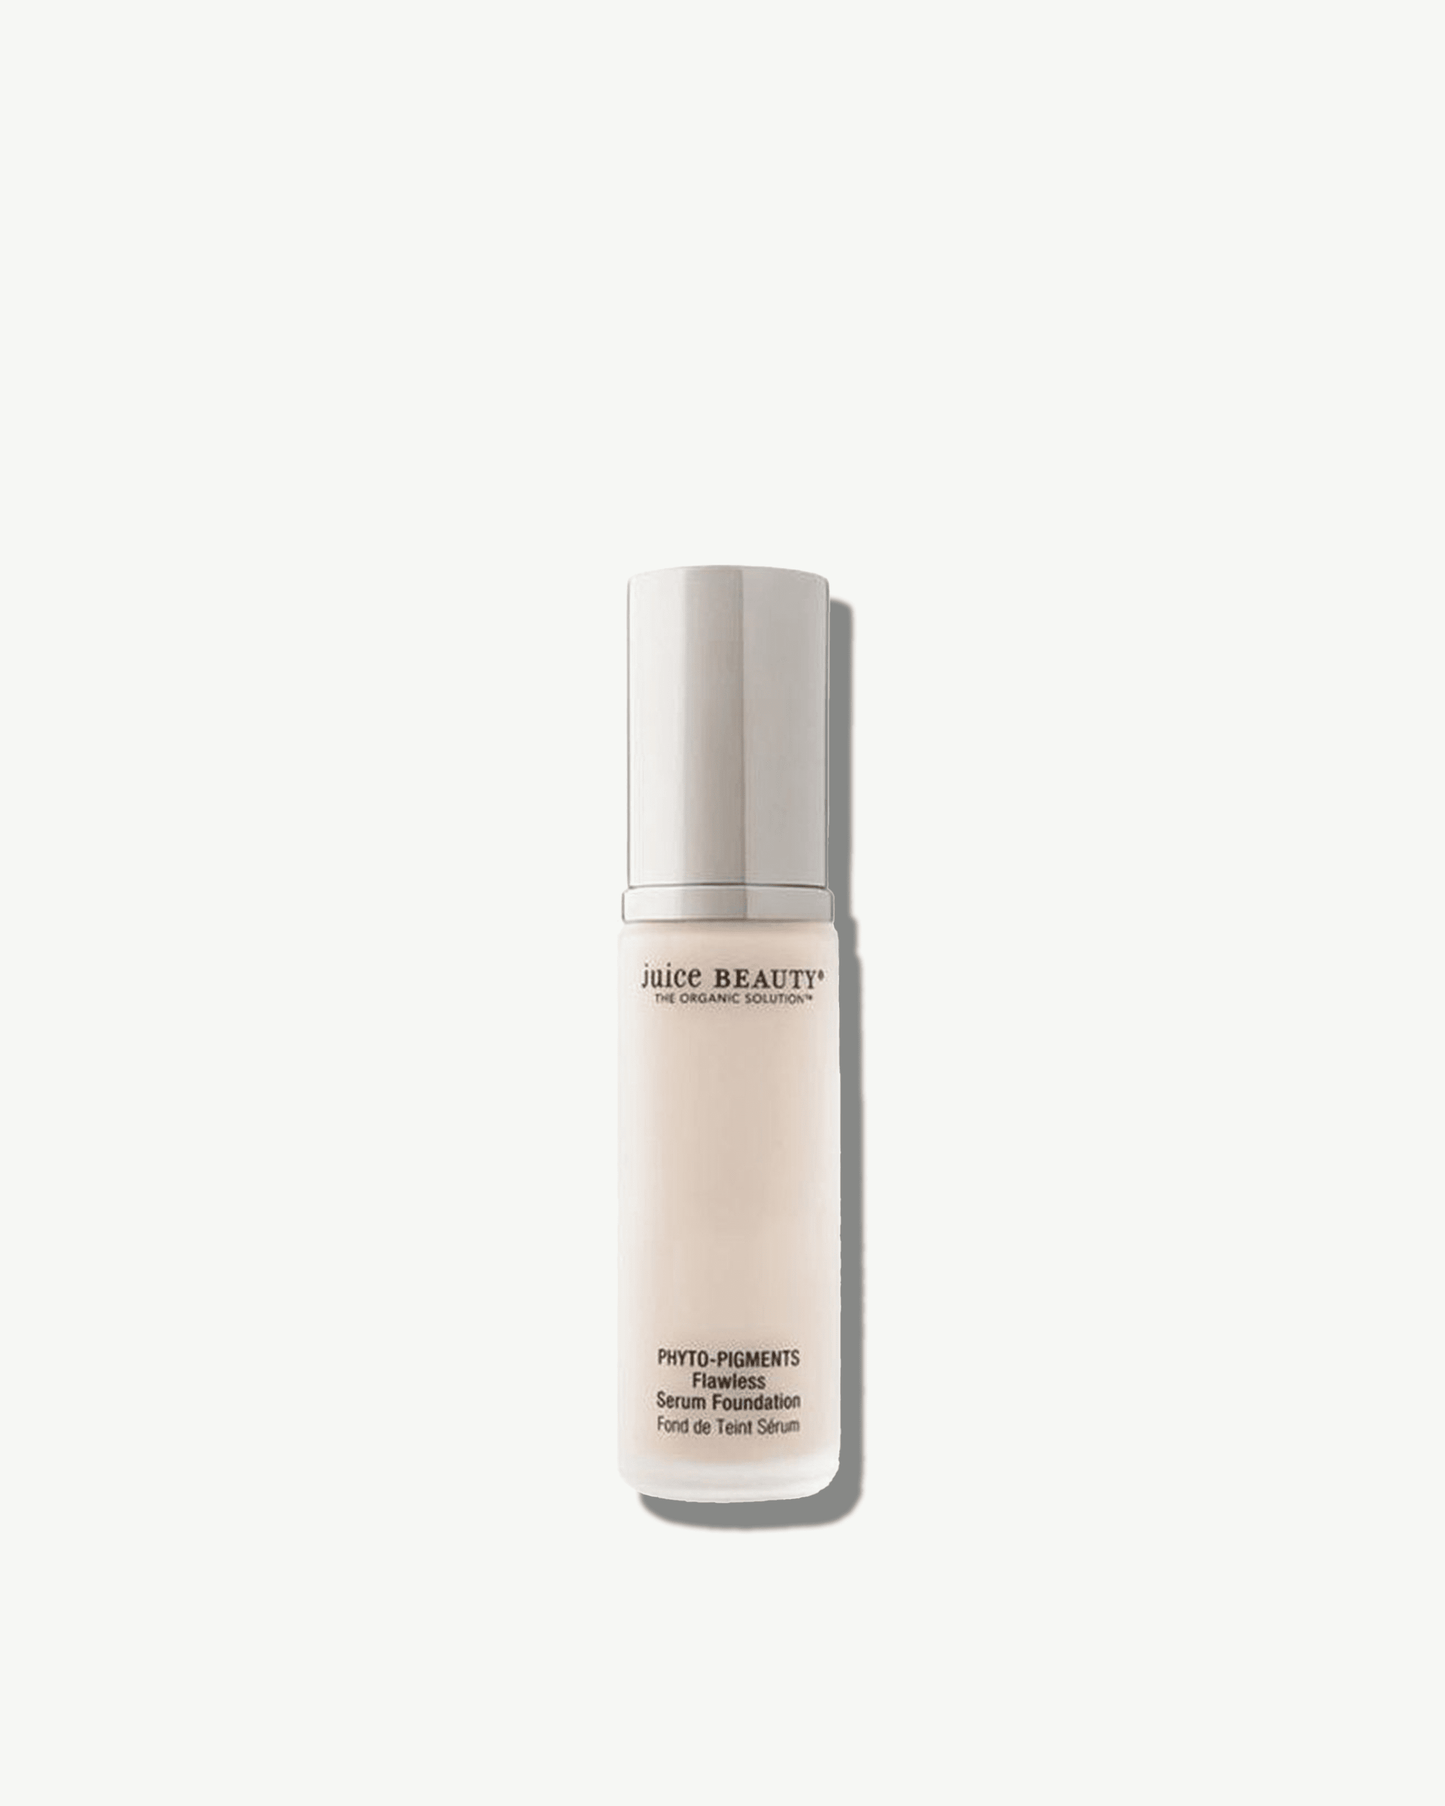 Phyto-Pigments Flawless Serum Foundation